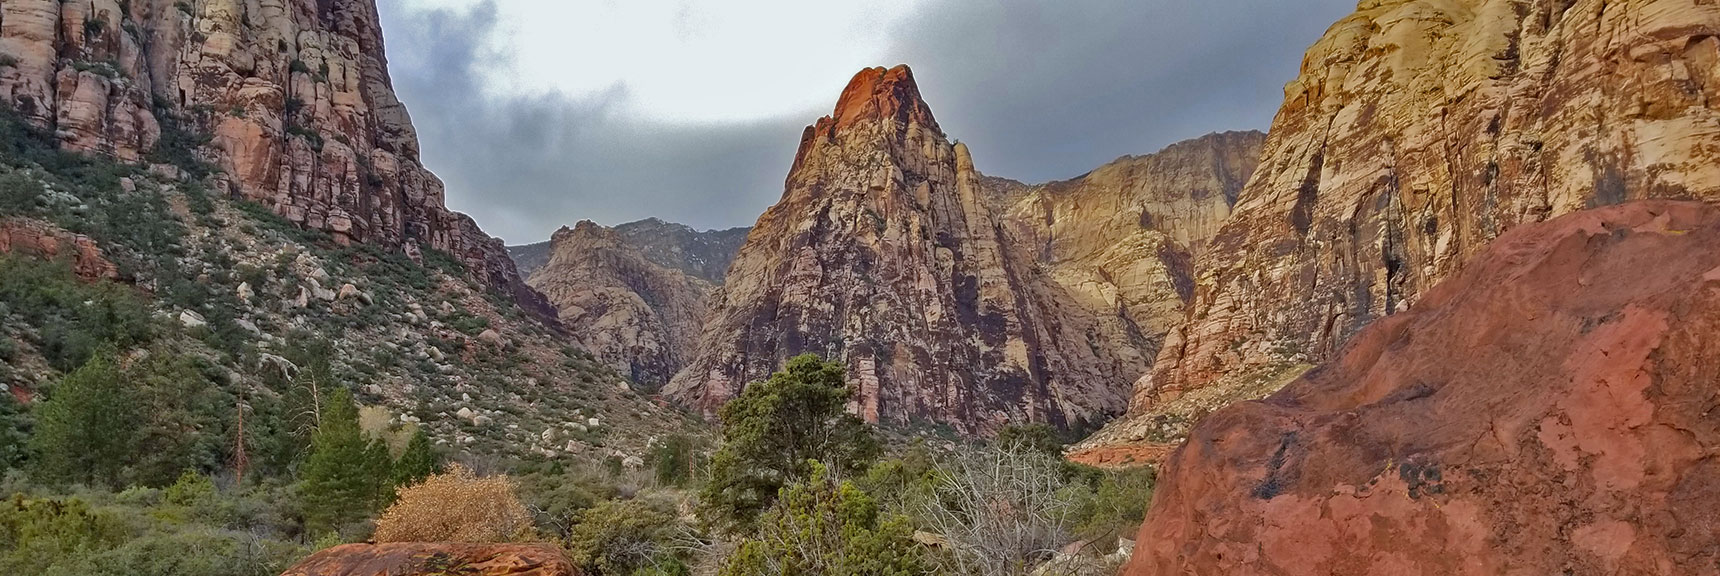 Pine Creek Canyon | Red Rock Canyon National Conservation Area, Nevada